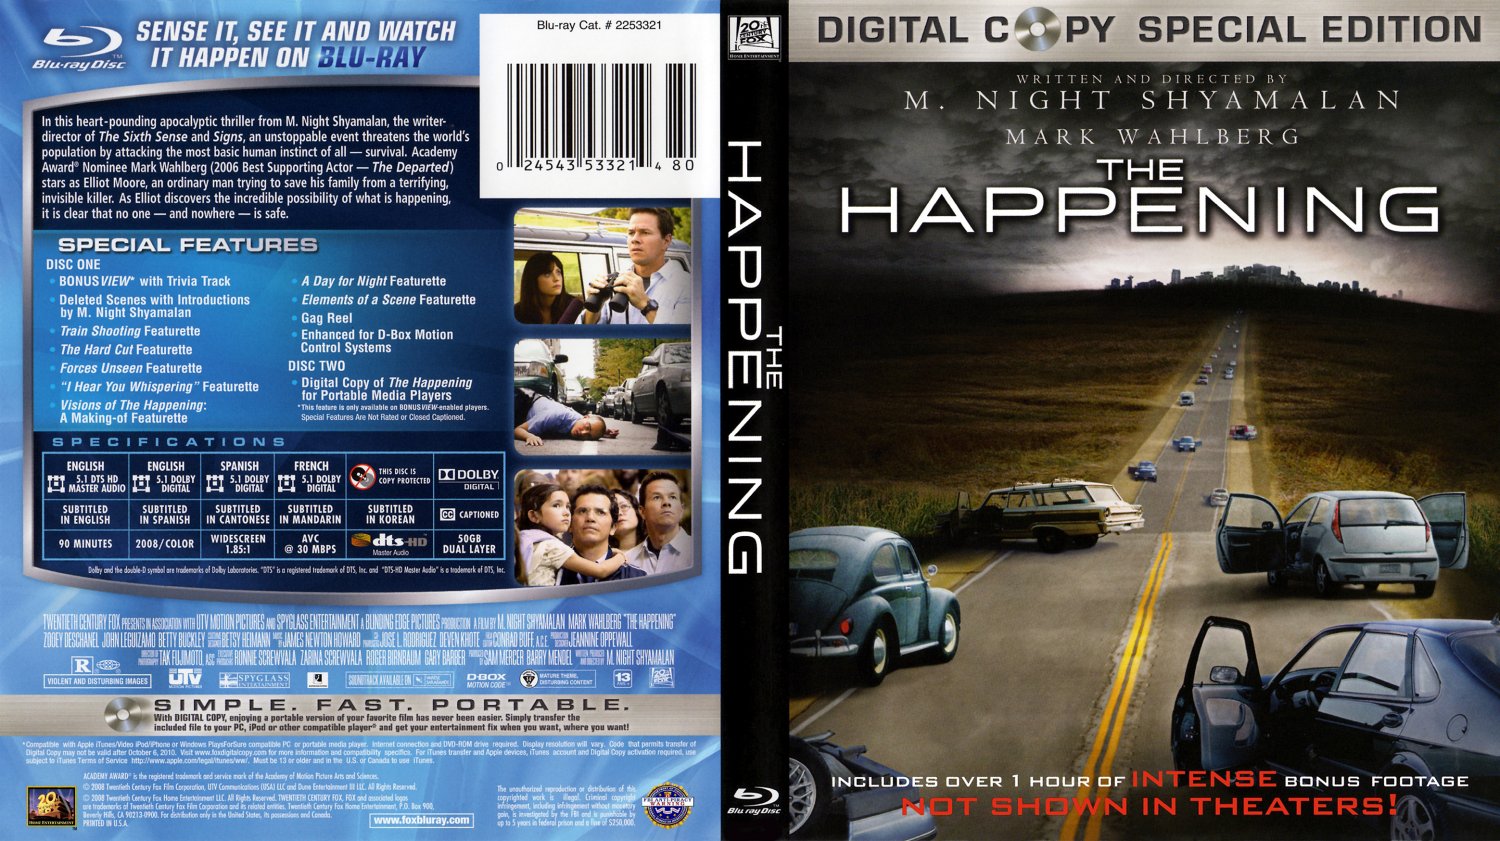 What happening in the world. Явление the happening, 2008. The happening 2.0. Картинки Cover of Blu ray hard Rain. Do it! Blu ray Cover.